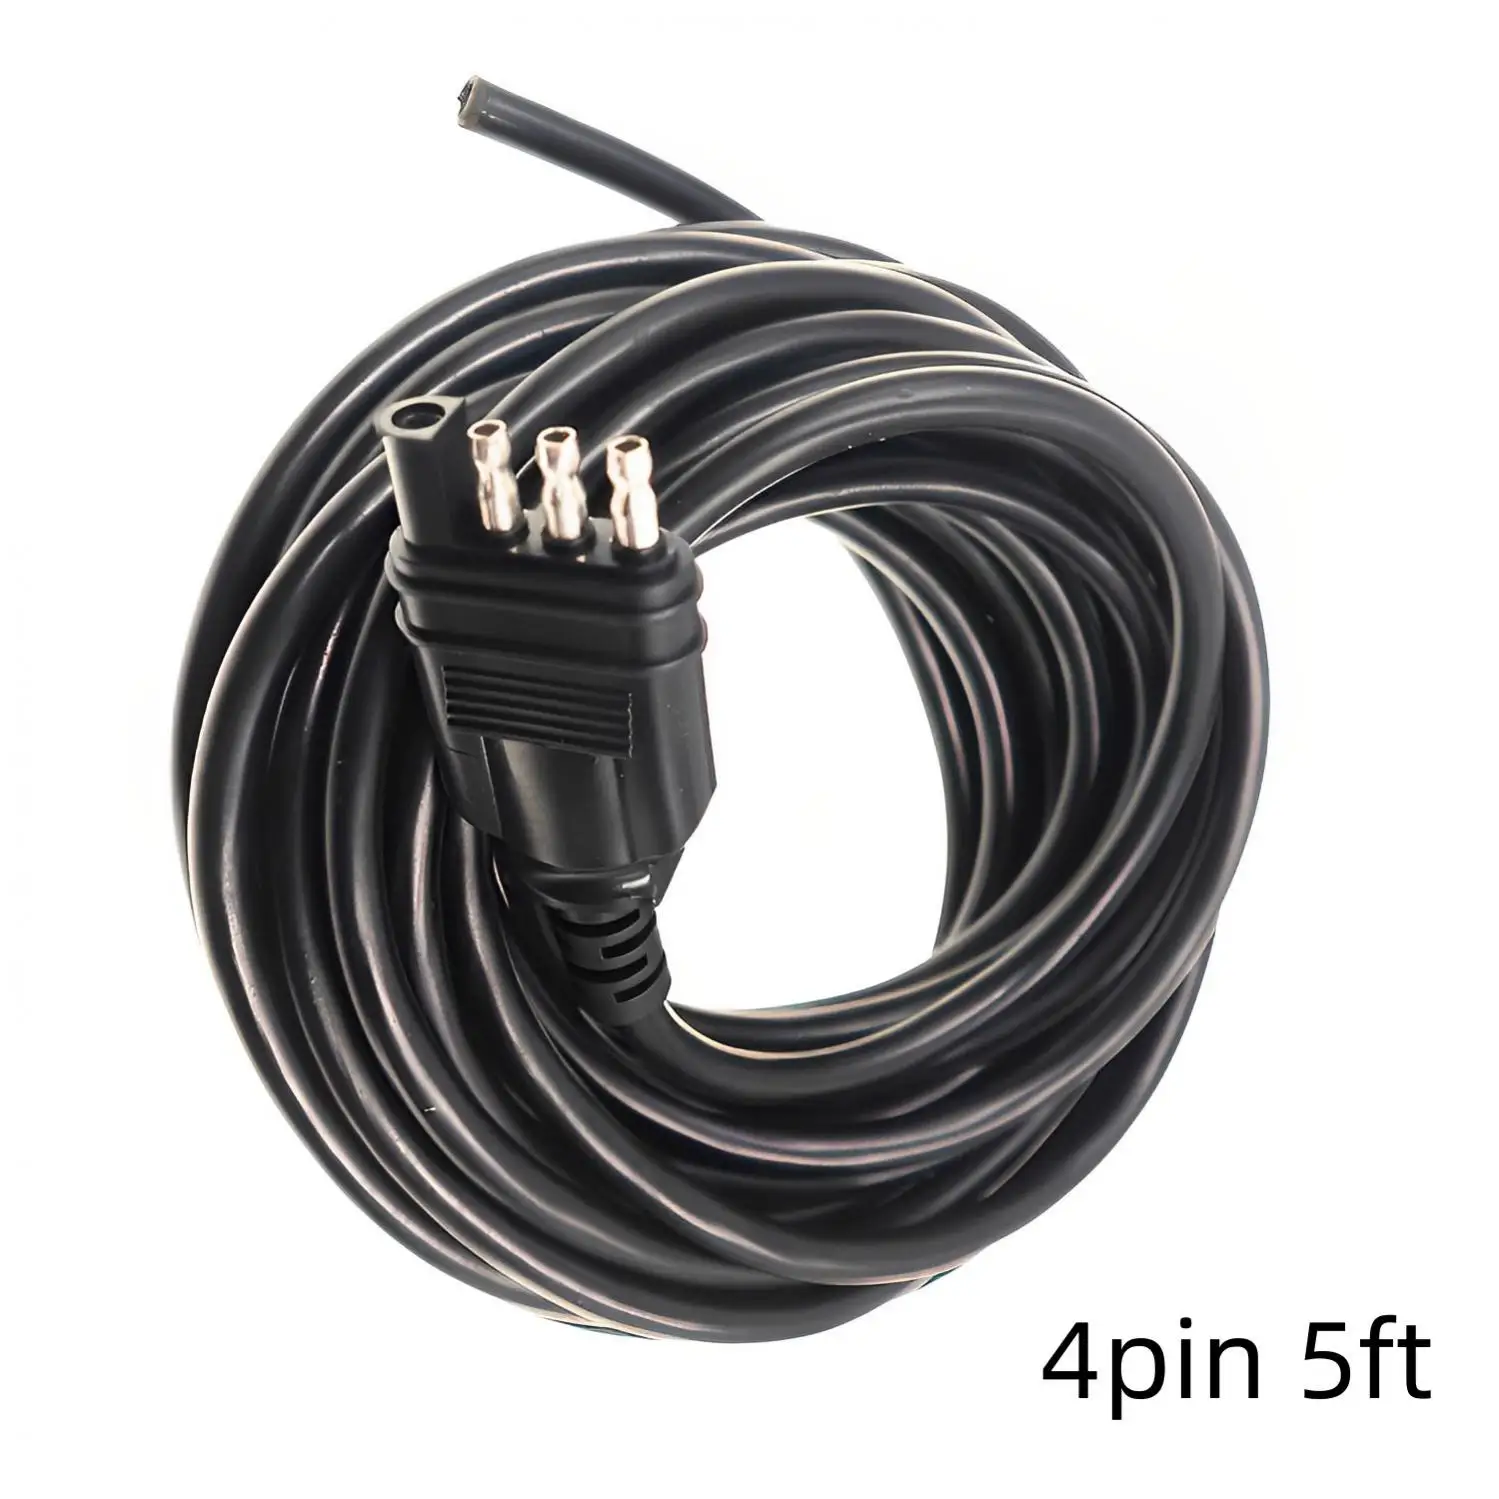 

5ft 4 Way ABS Waterproof Trailer Wiring Harness Cable Cord Kit for Commercial Vehicle / Semi -trailer / Trailer